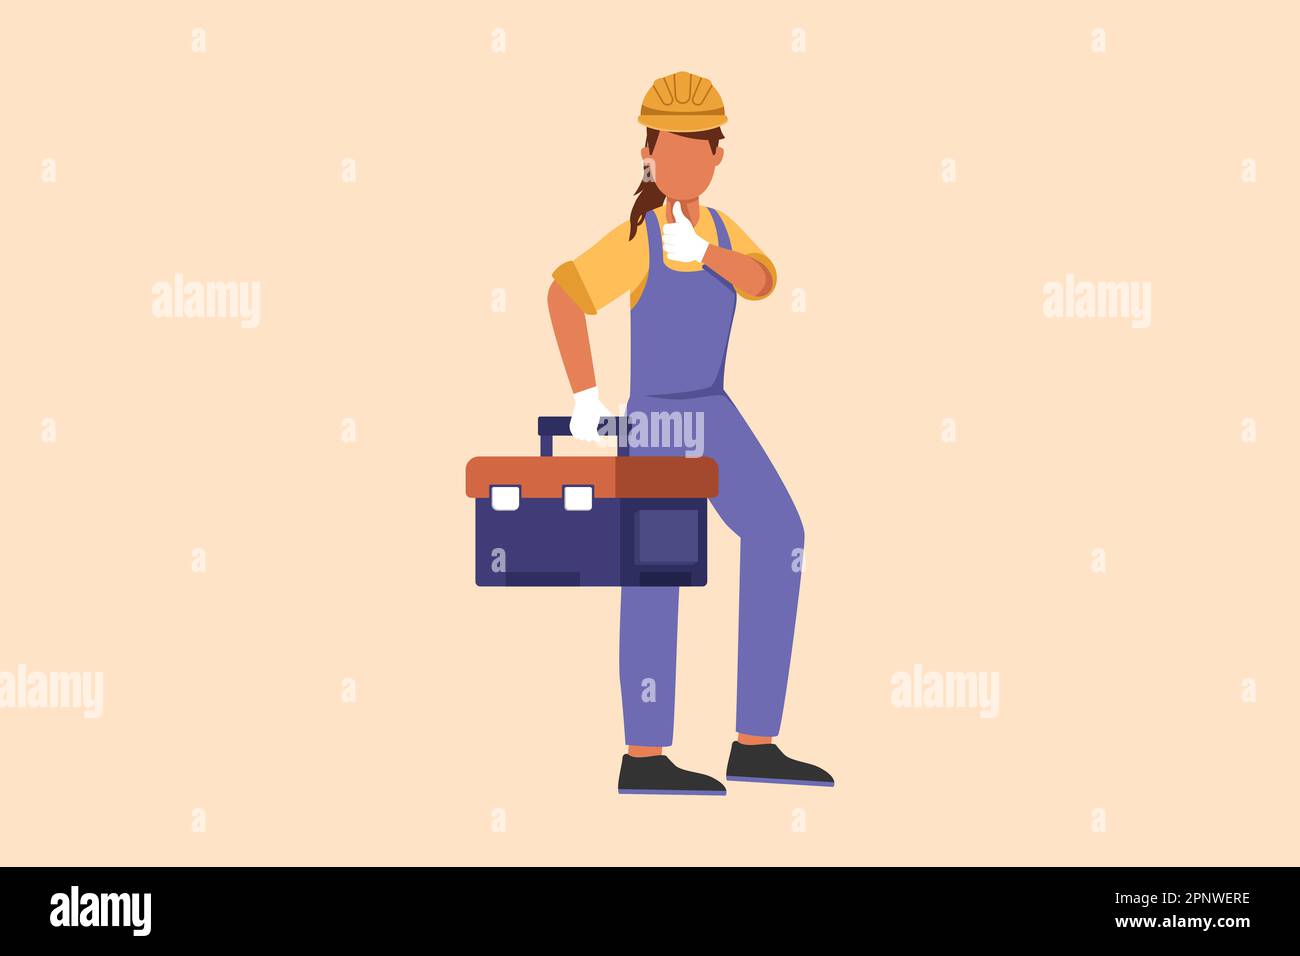 Business flat cartoon style drawing handywoman plumber standing and holding tools box. Professional repairwoman in overalls ready for work. Home decor Stock Photo